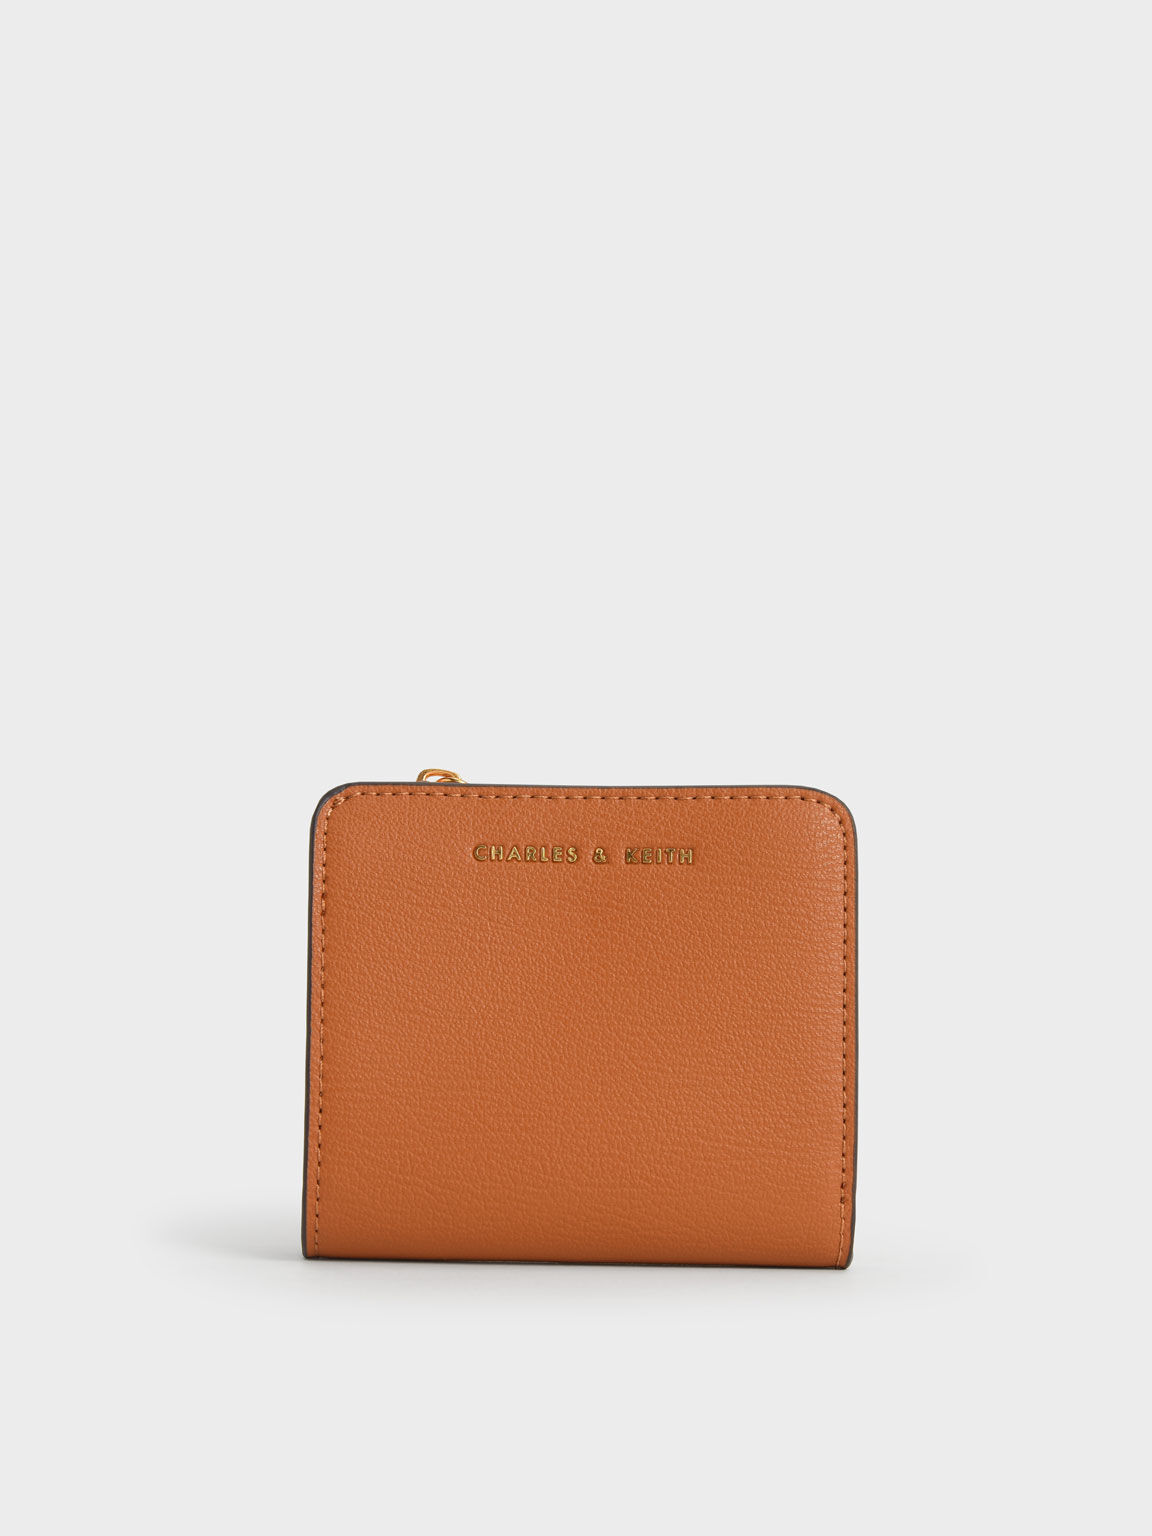 Women's Wallets | Shop Exclusive Styles | CHARLES & KEITH UK